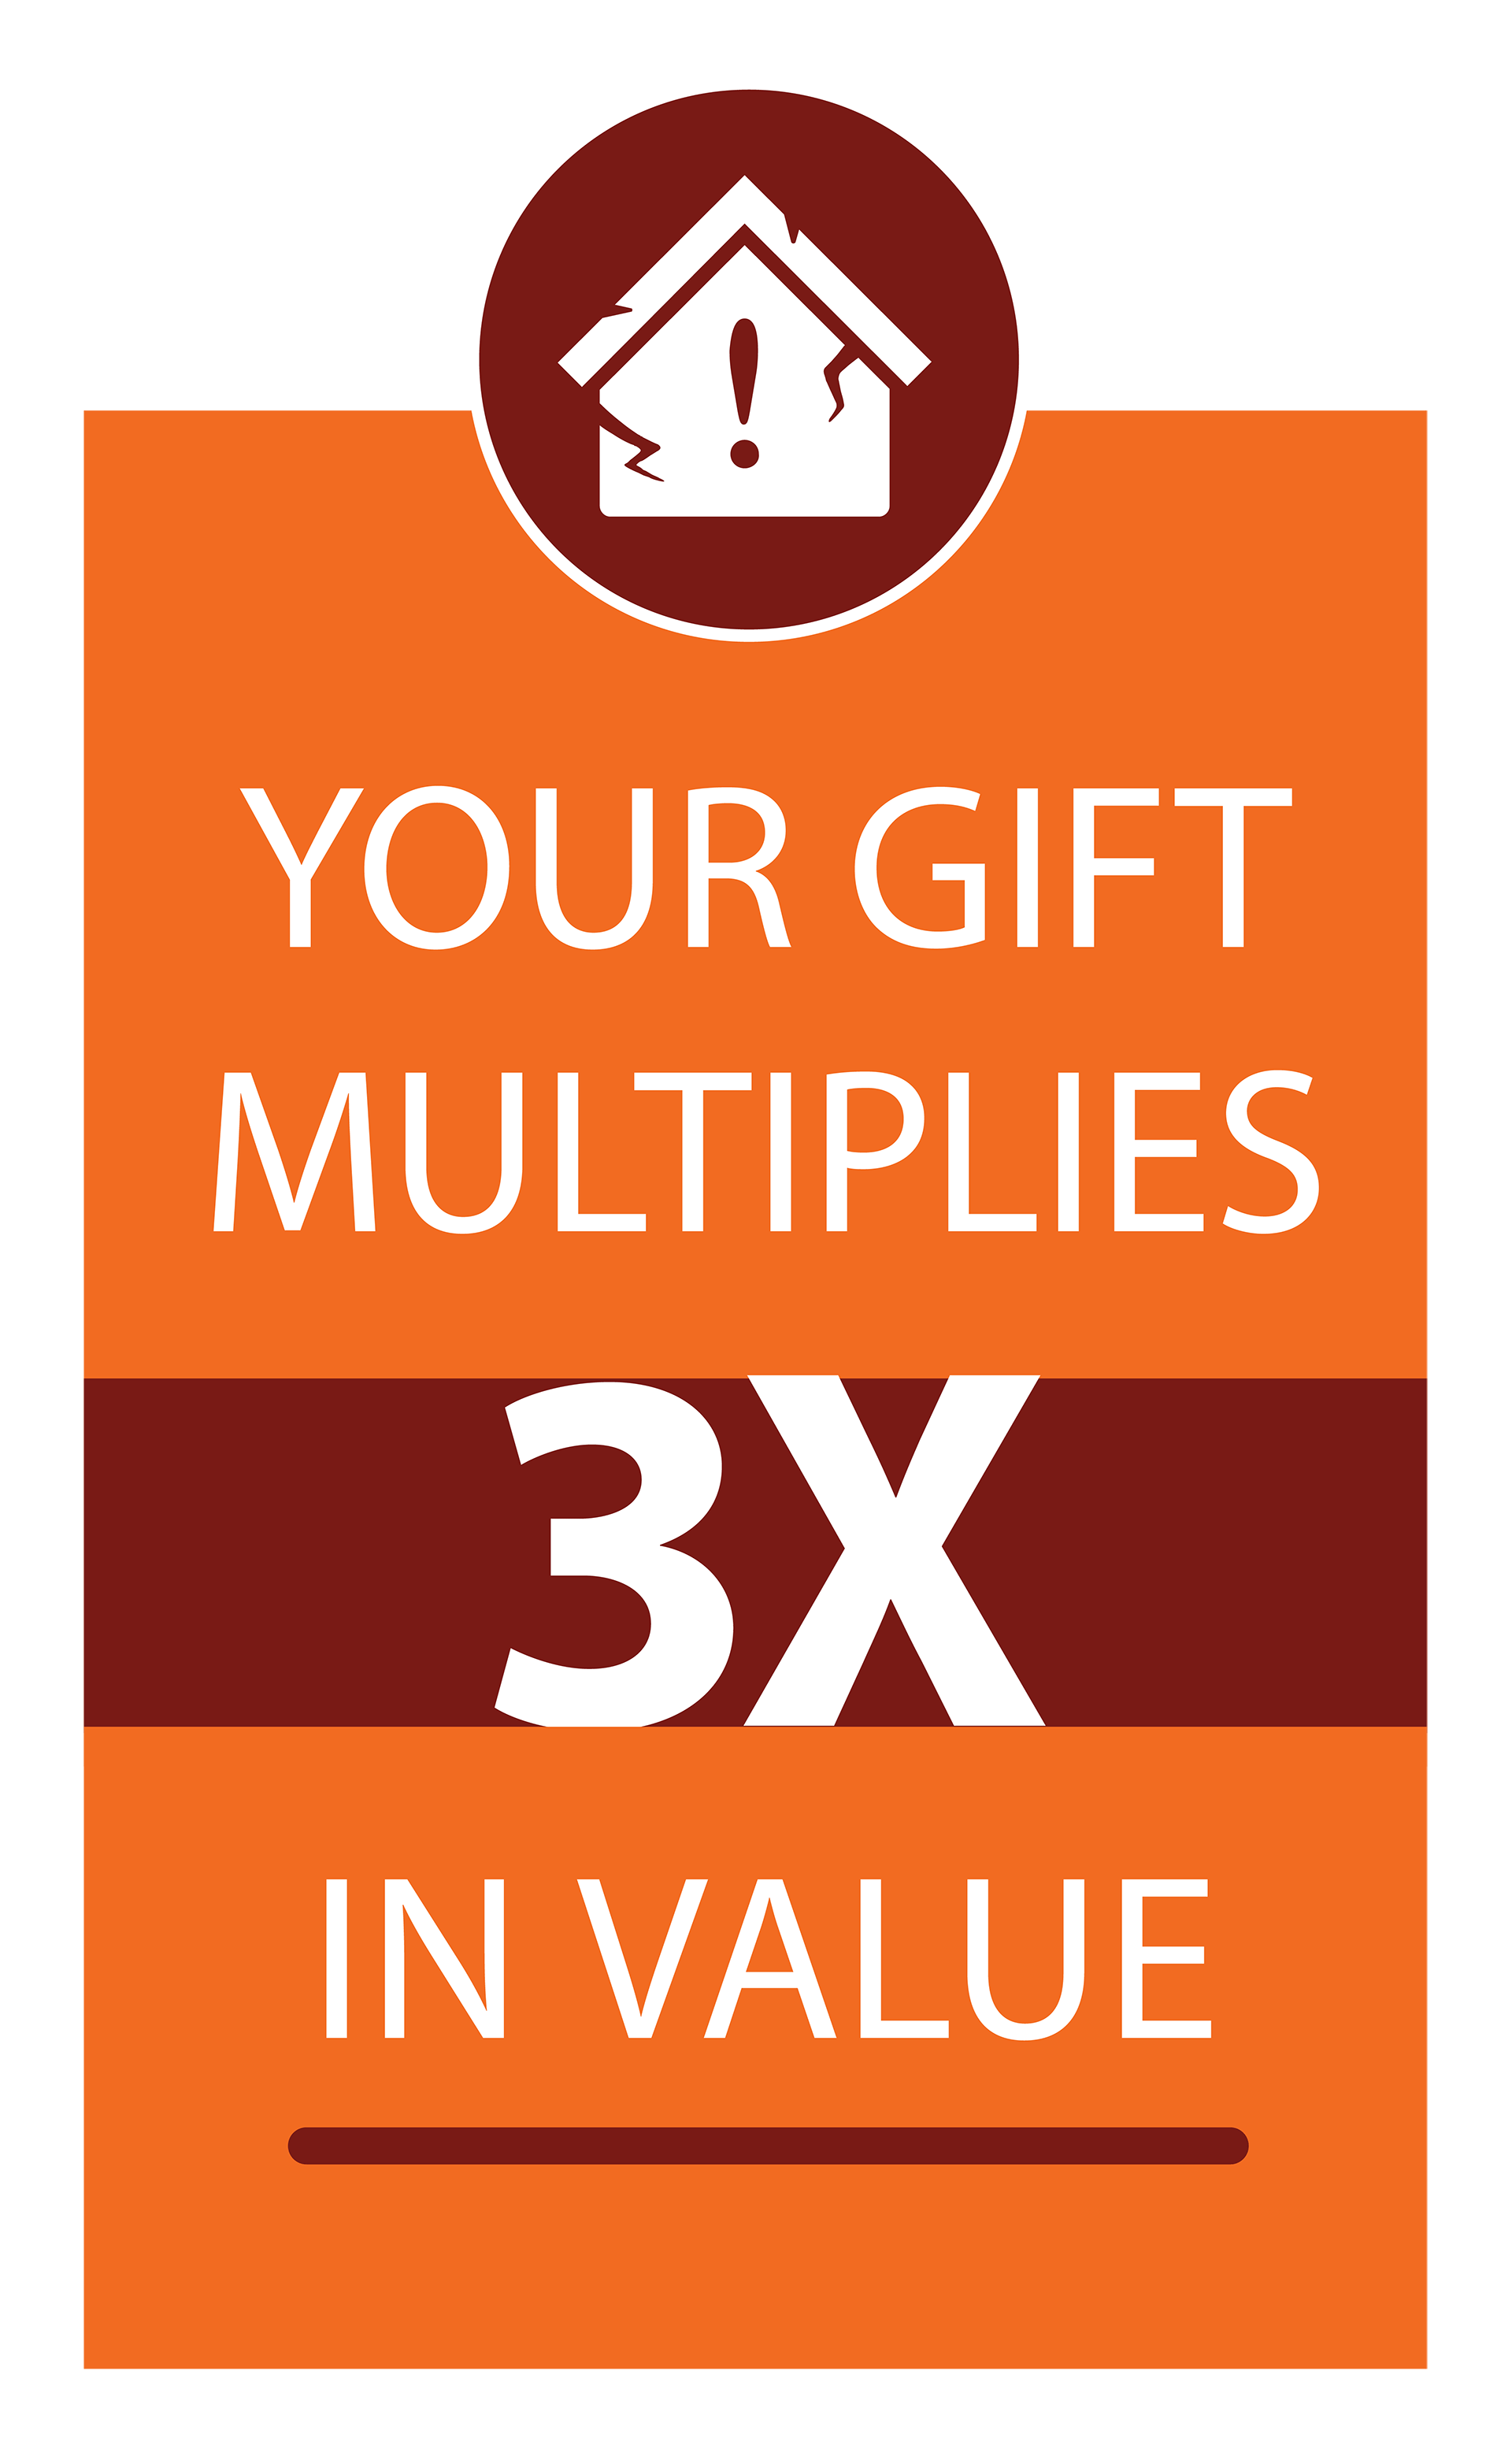 Your gift multiplies 3x in value.